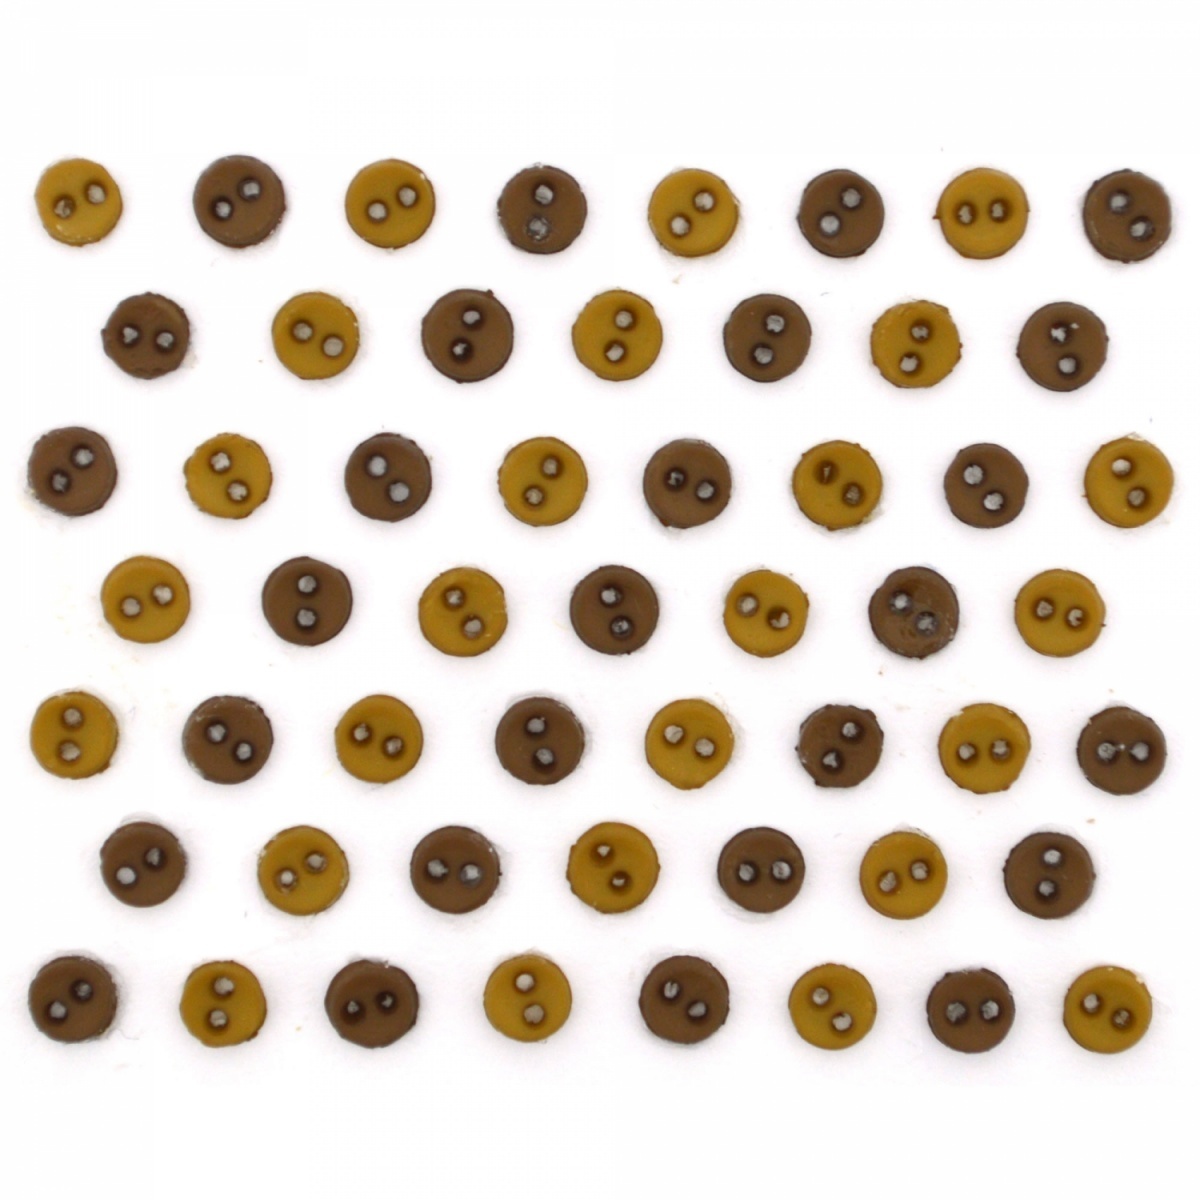 MM Round Browns Set of Decorative Buttons фото 1